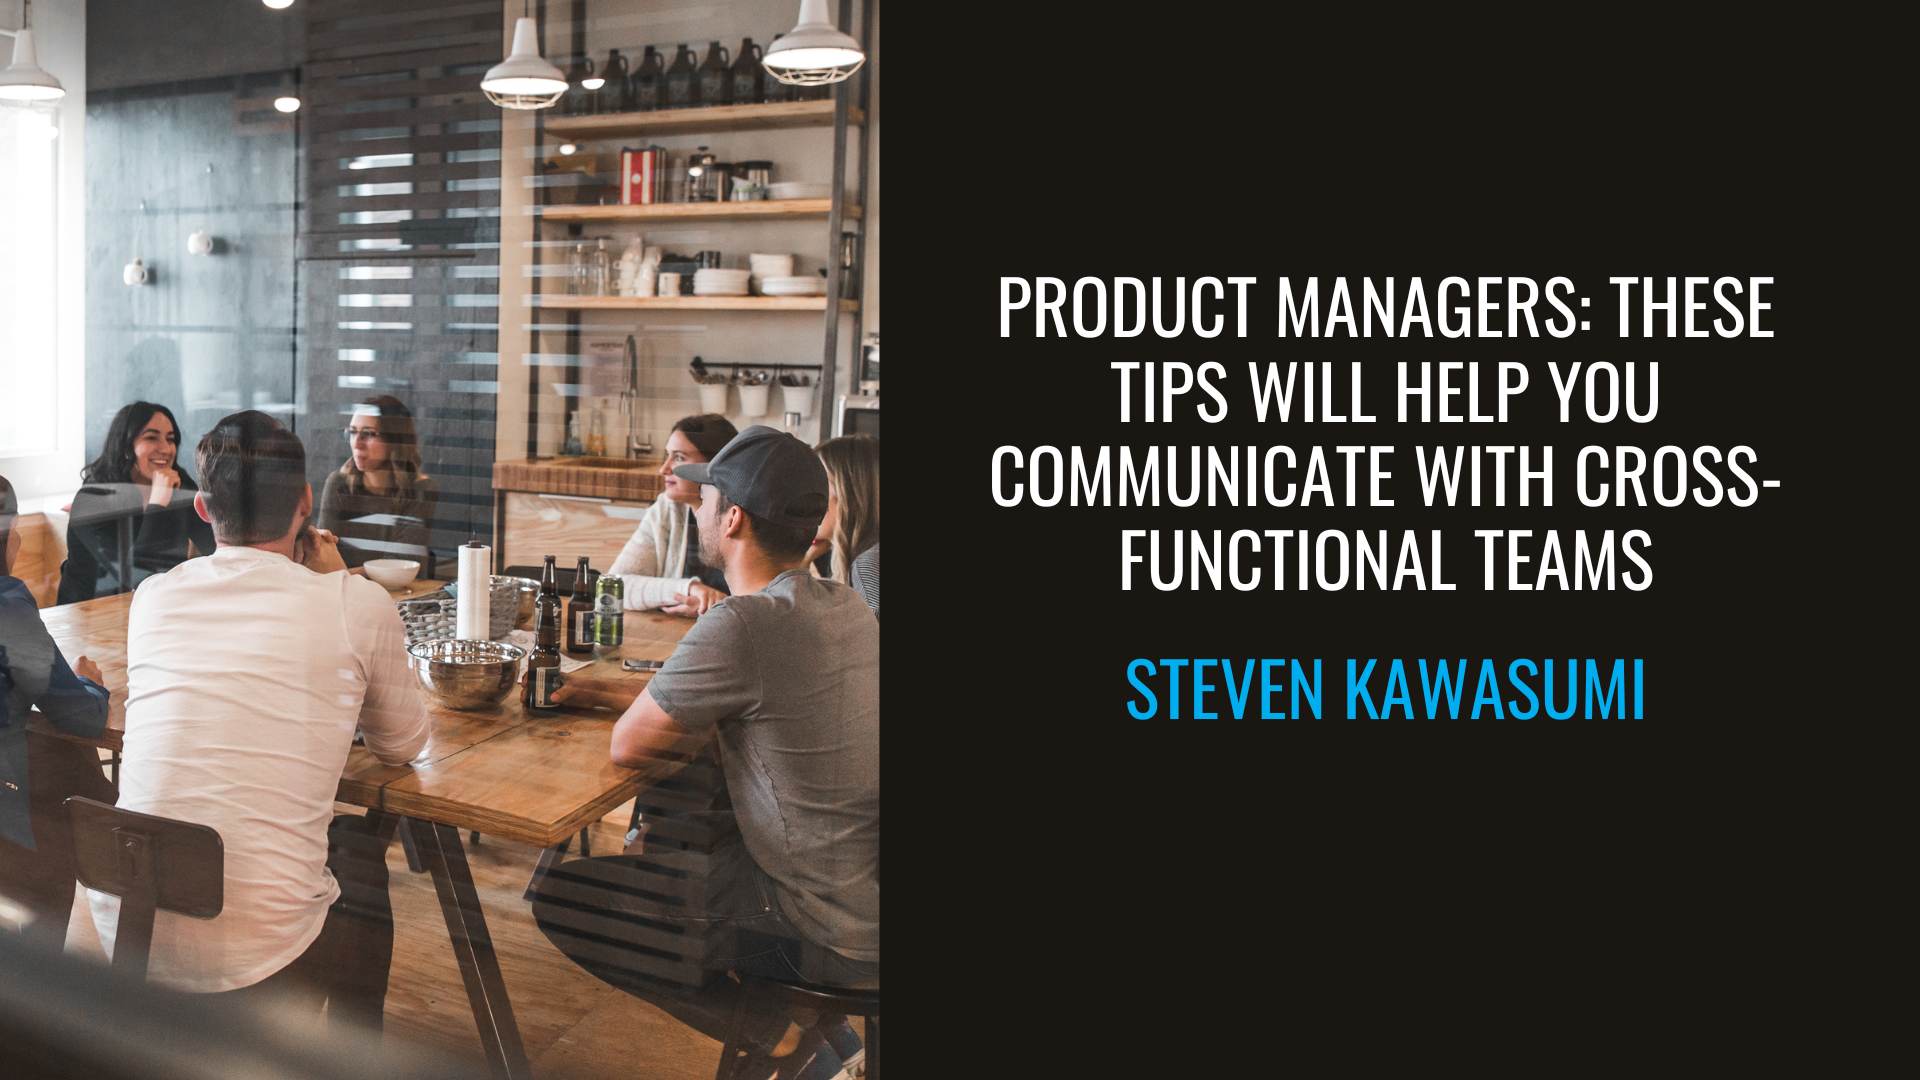 Product Managers: These Tips Will Help You Communicate with Cross-Functional Teams